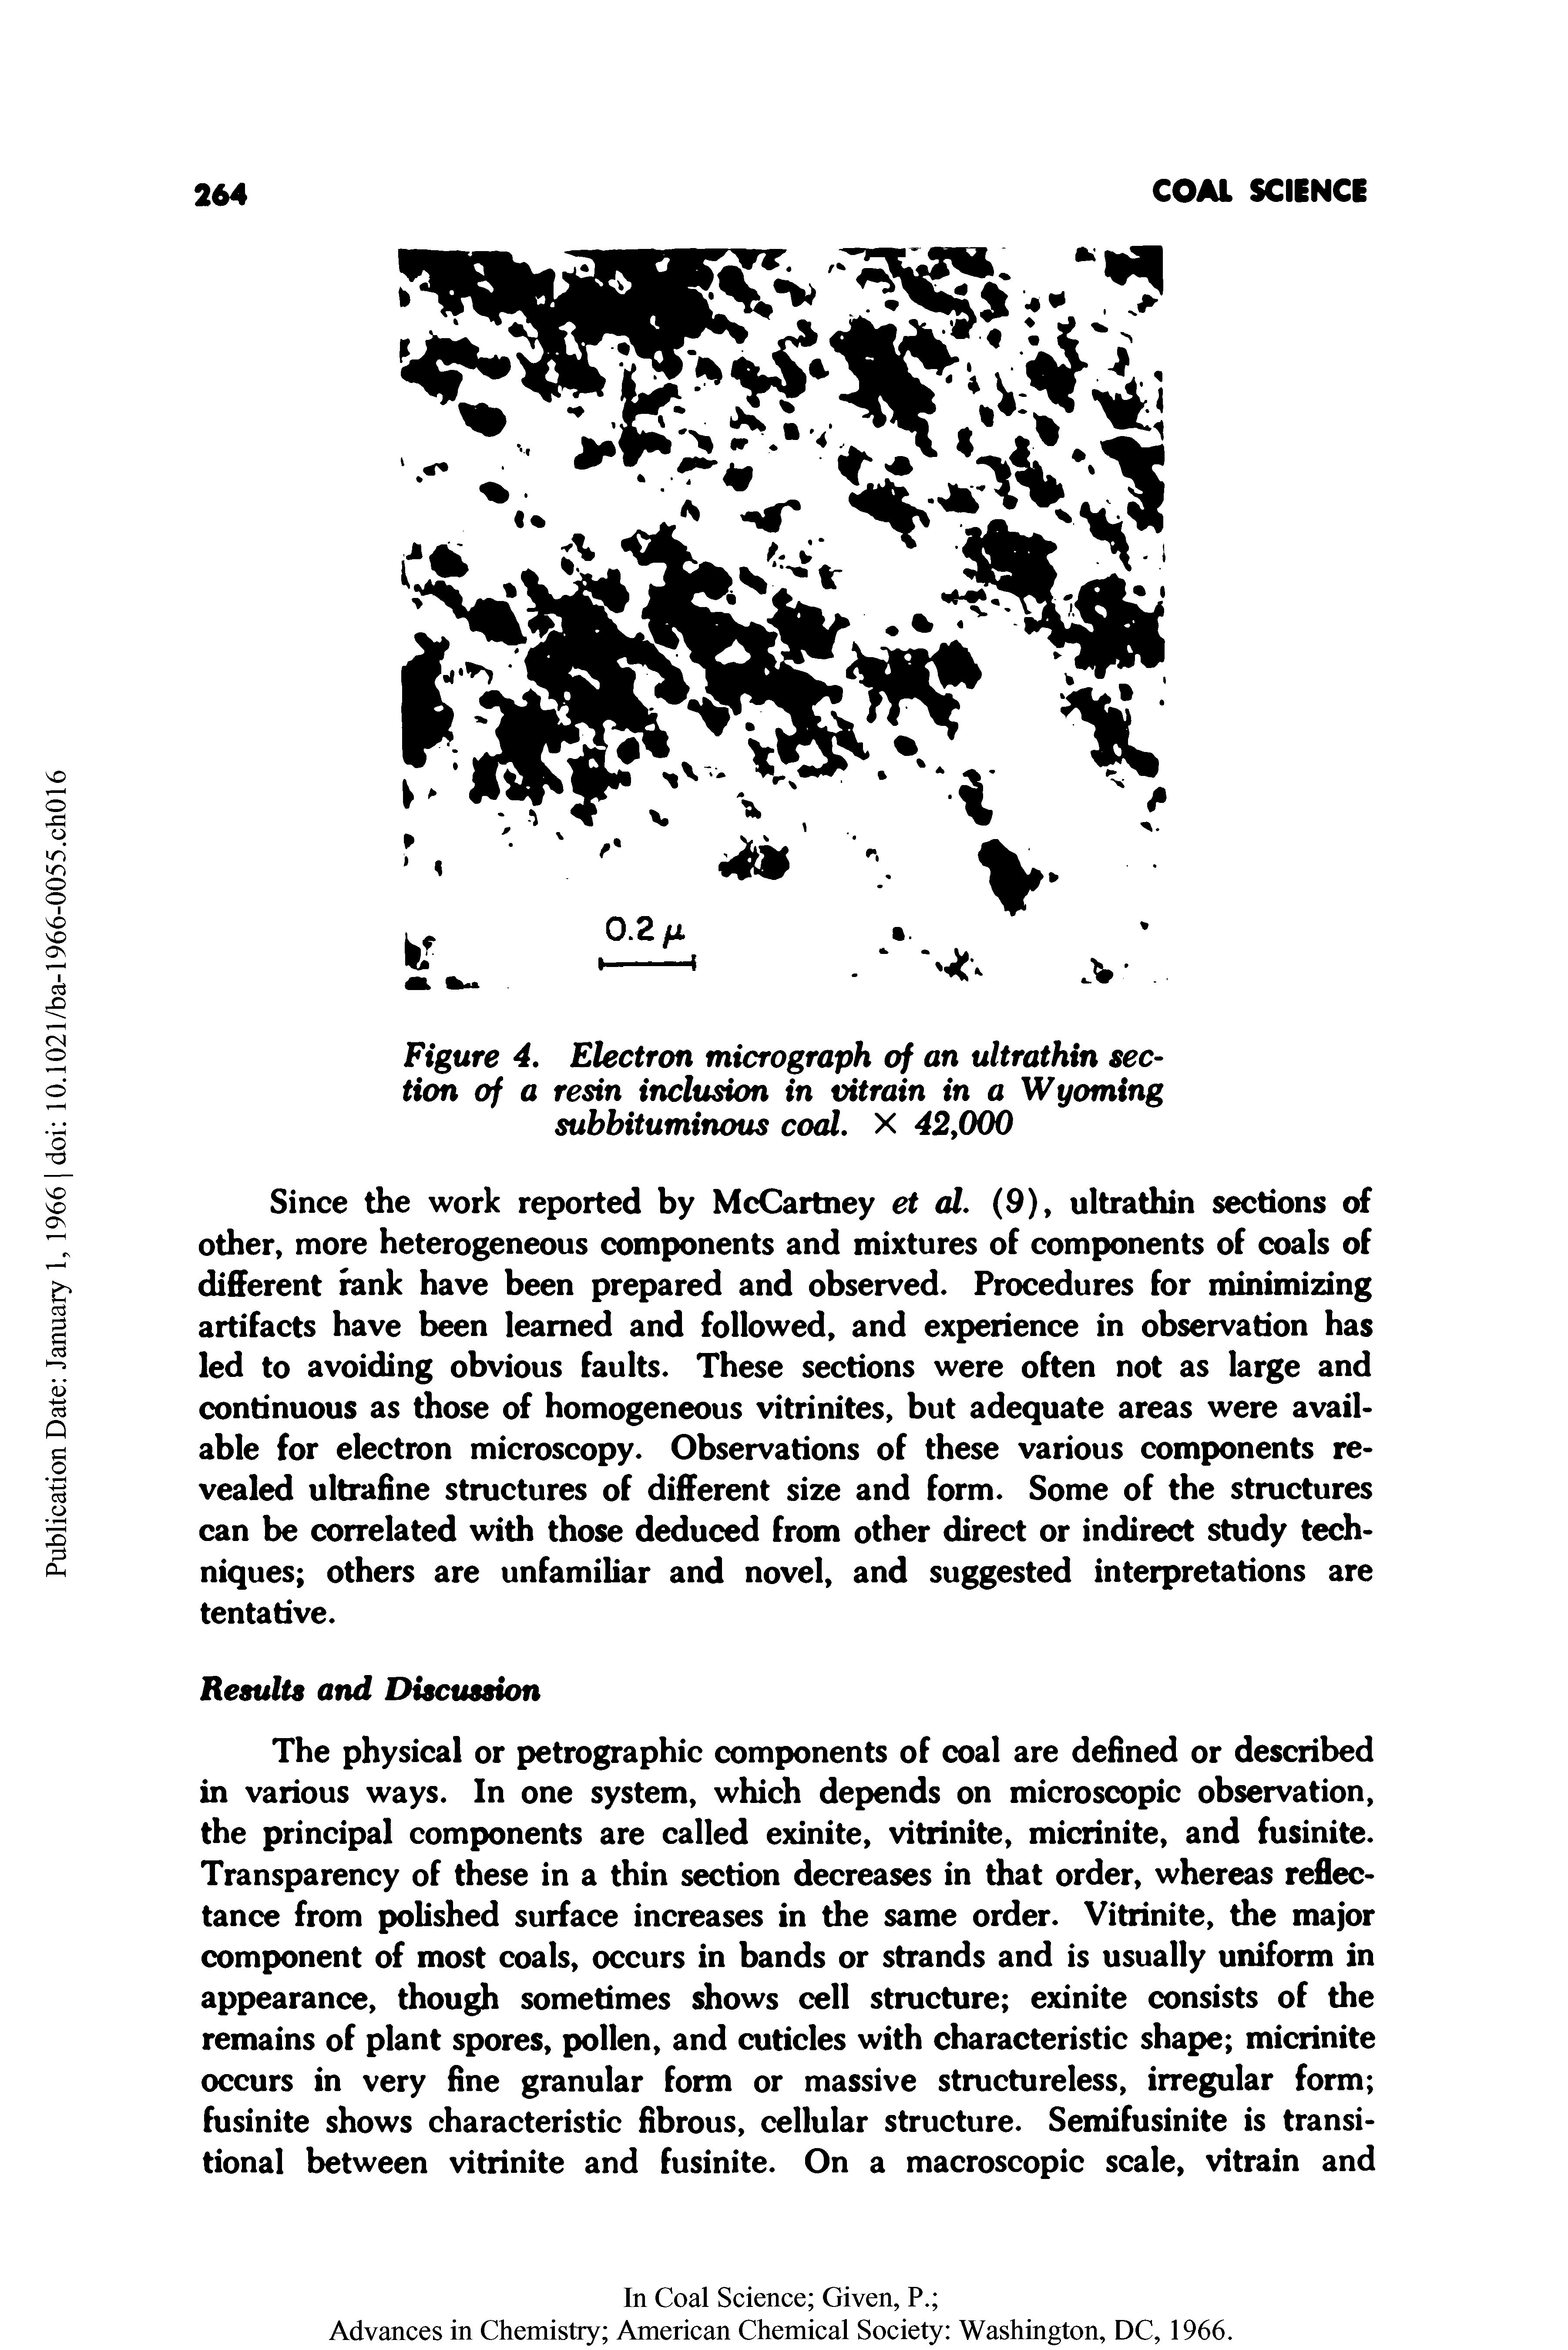 Figure 4. Electron micrograph of an ultrathin section of a resin inclusion in vitrain in a Wyoming subbituminous coal. X 42,000...